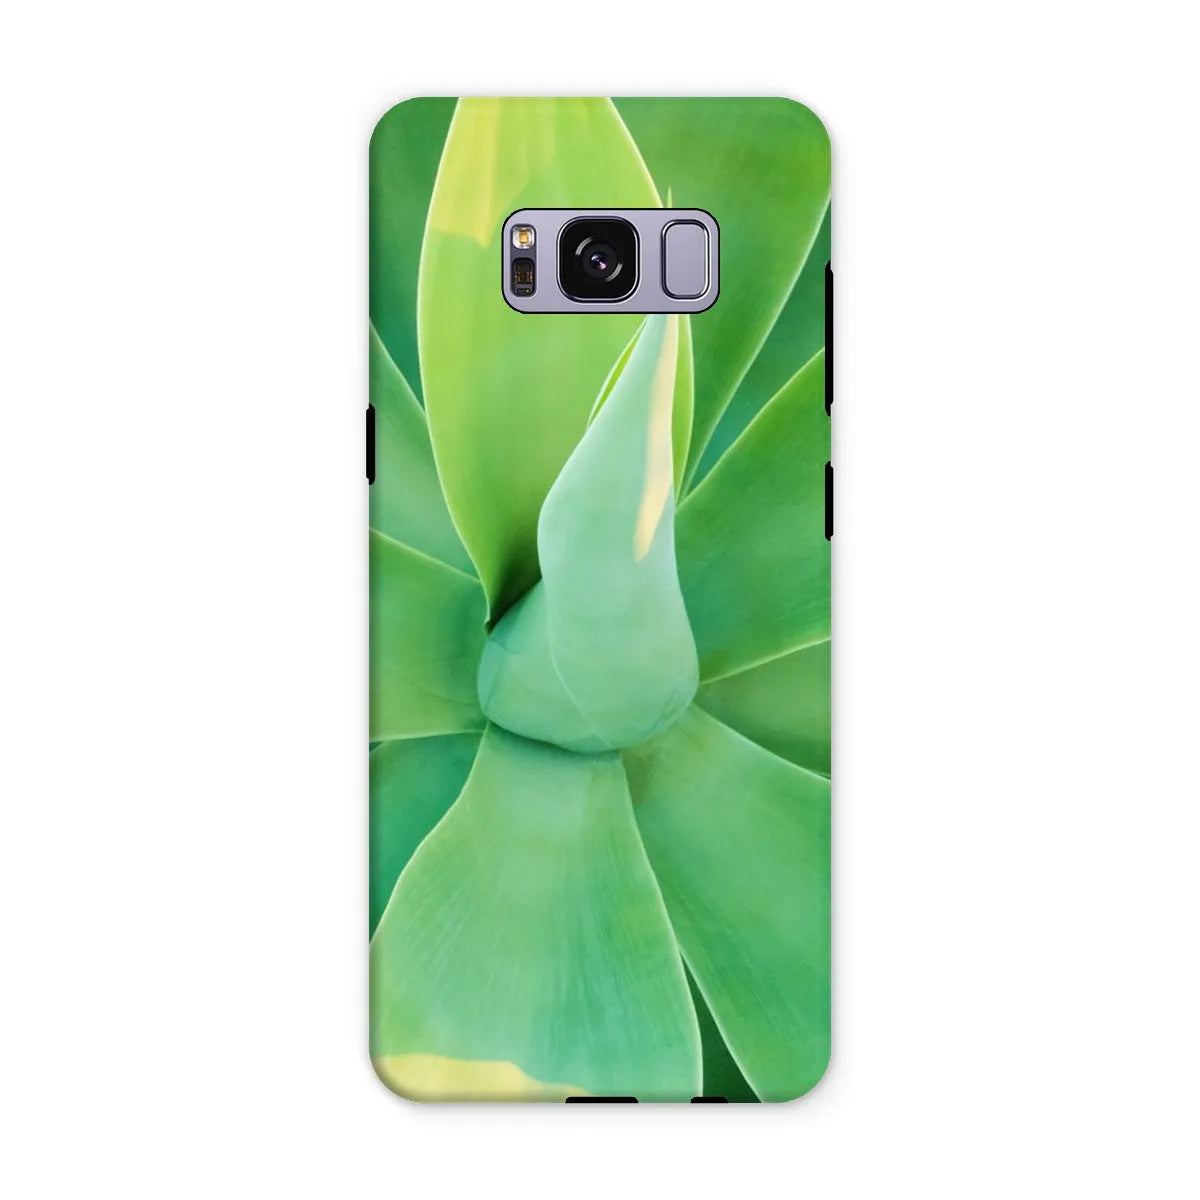 In Bloom Too Tough Phone Case - Samsung Galaxy S8 Plus / Matte - Mobile Phone Cases - Aesthetic Art